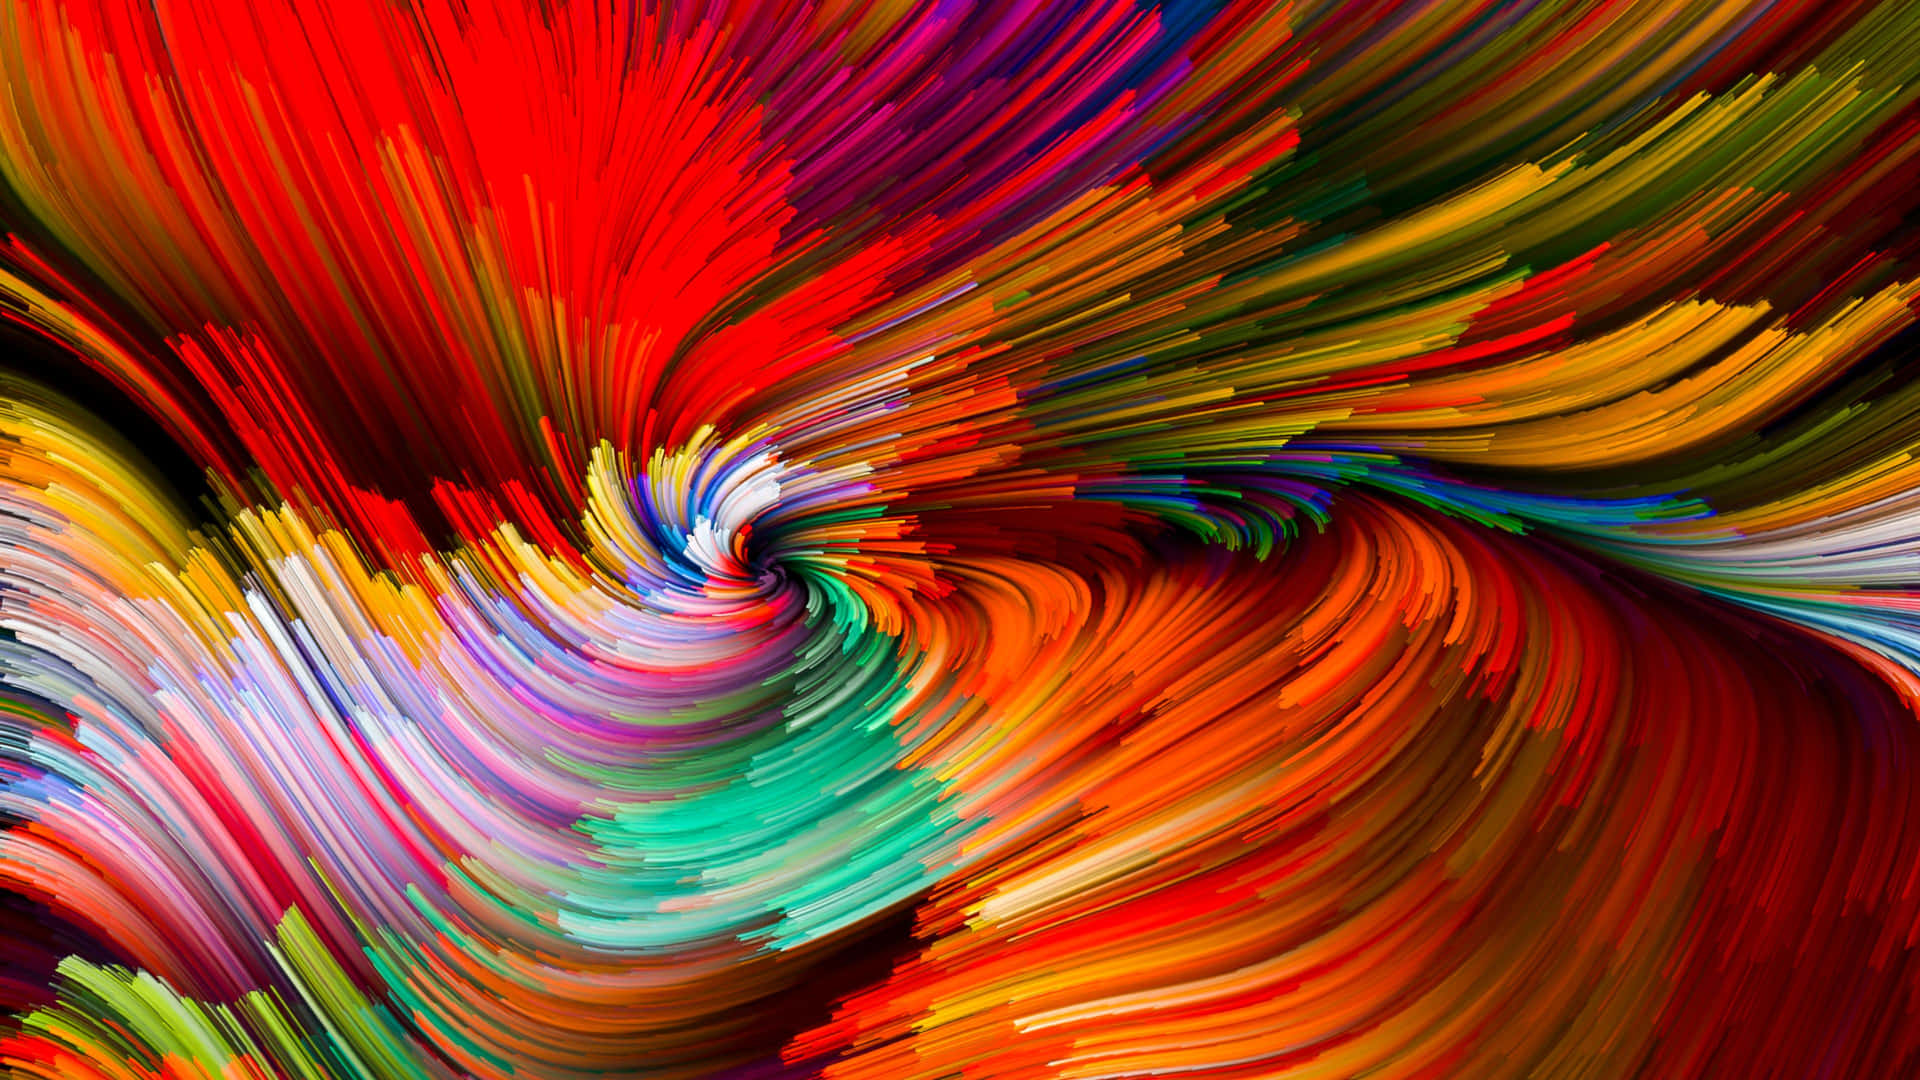 Abstract Colorful Swirls Of Paint Background